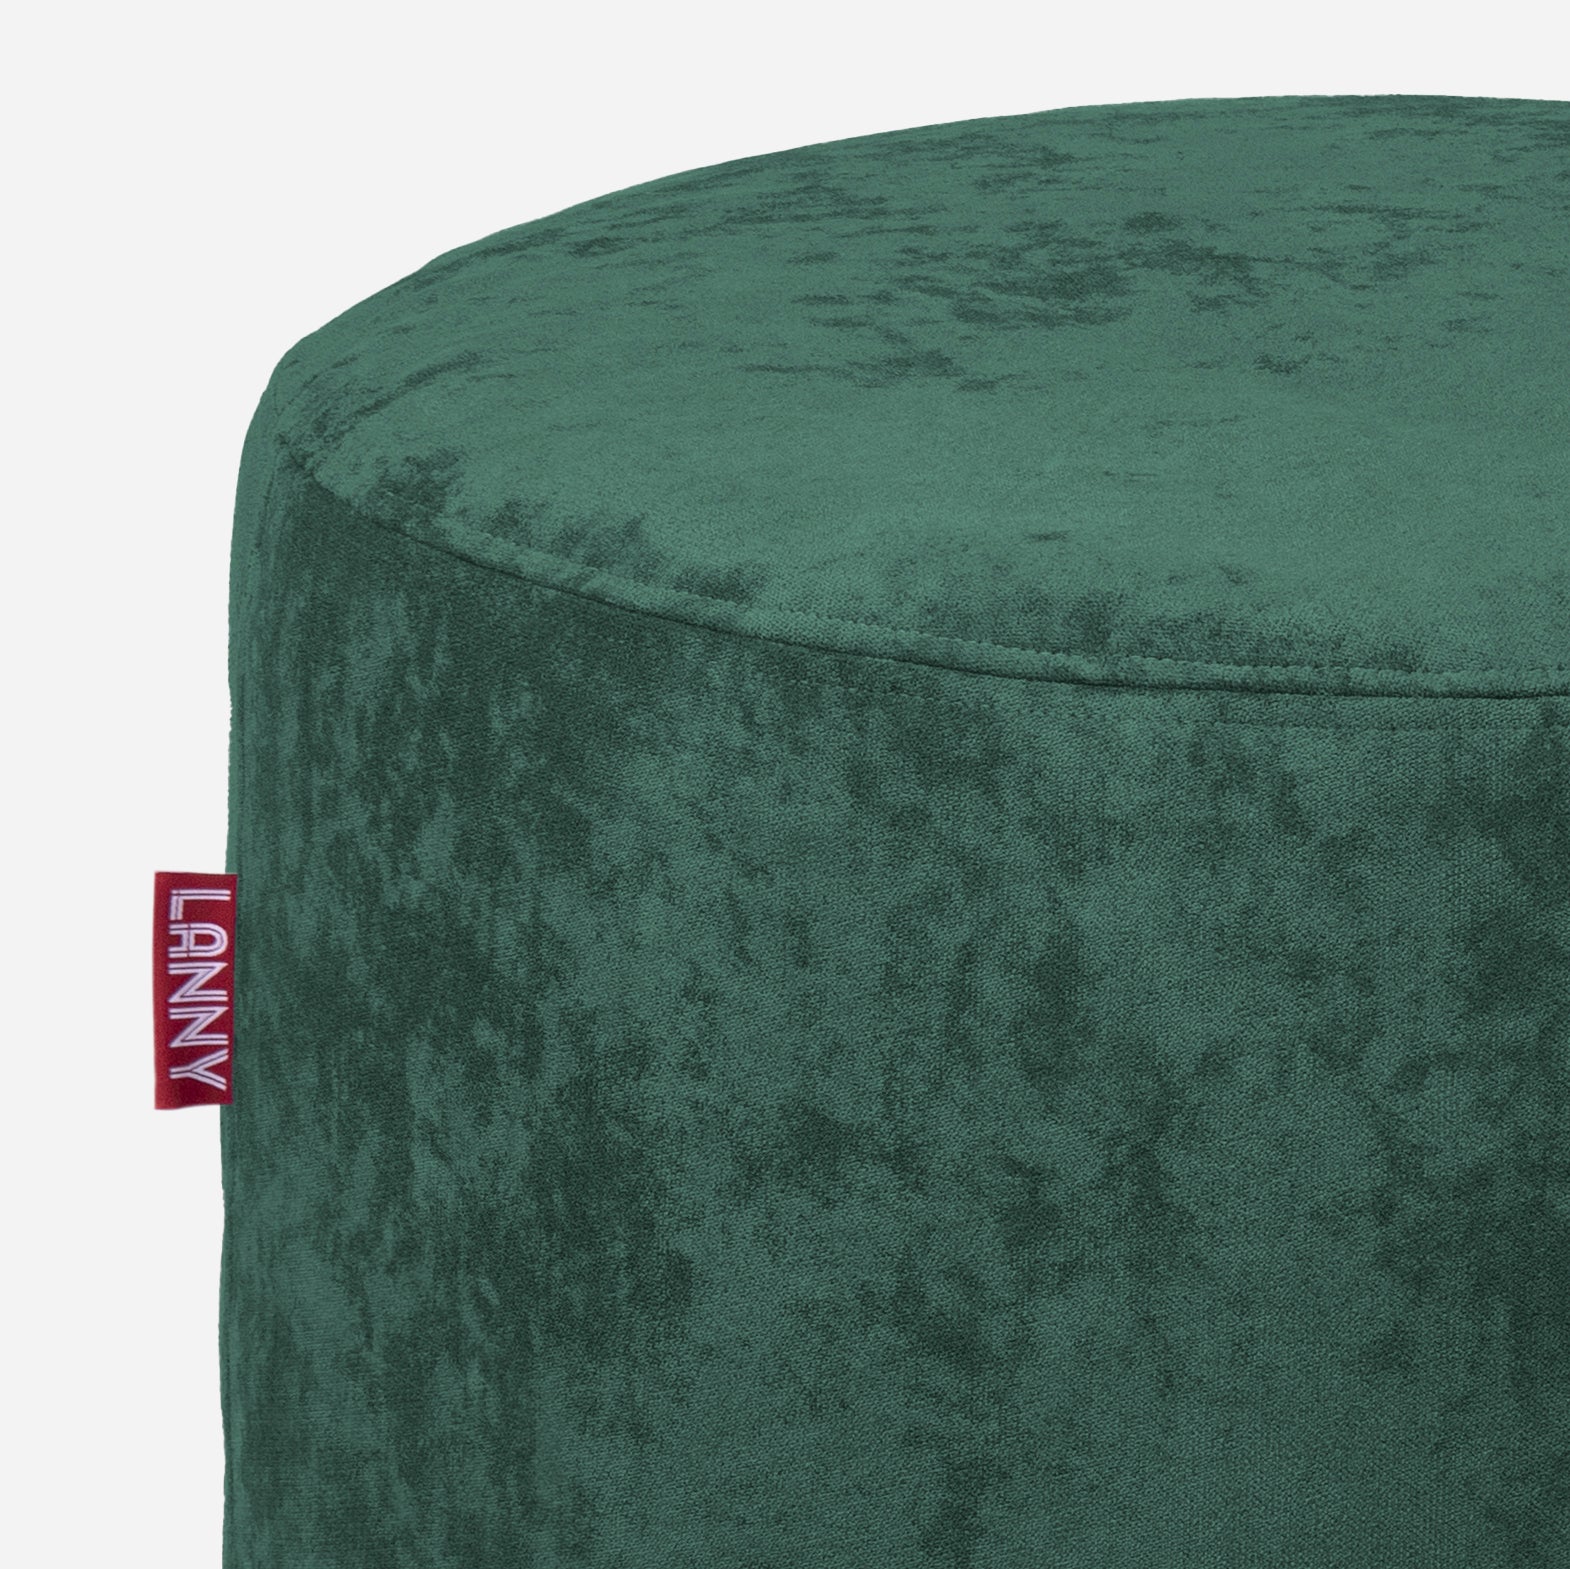 Pouf, Ottoman Green color by Lanny